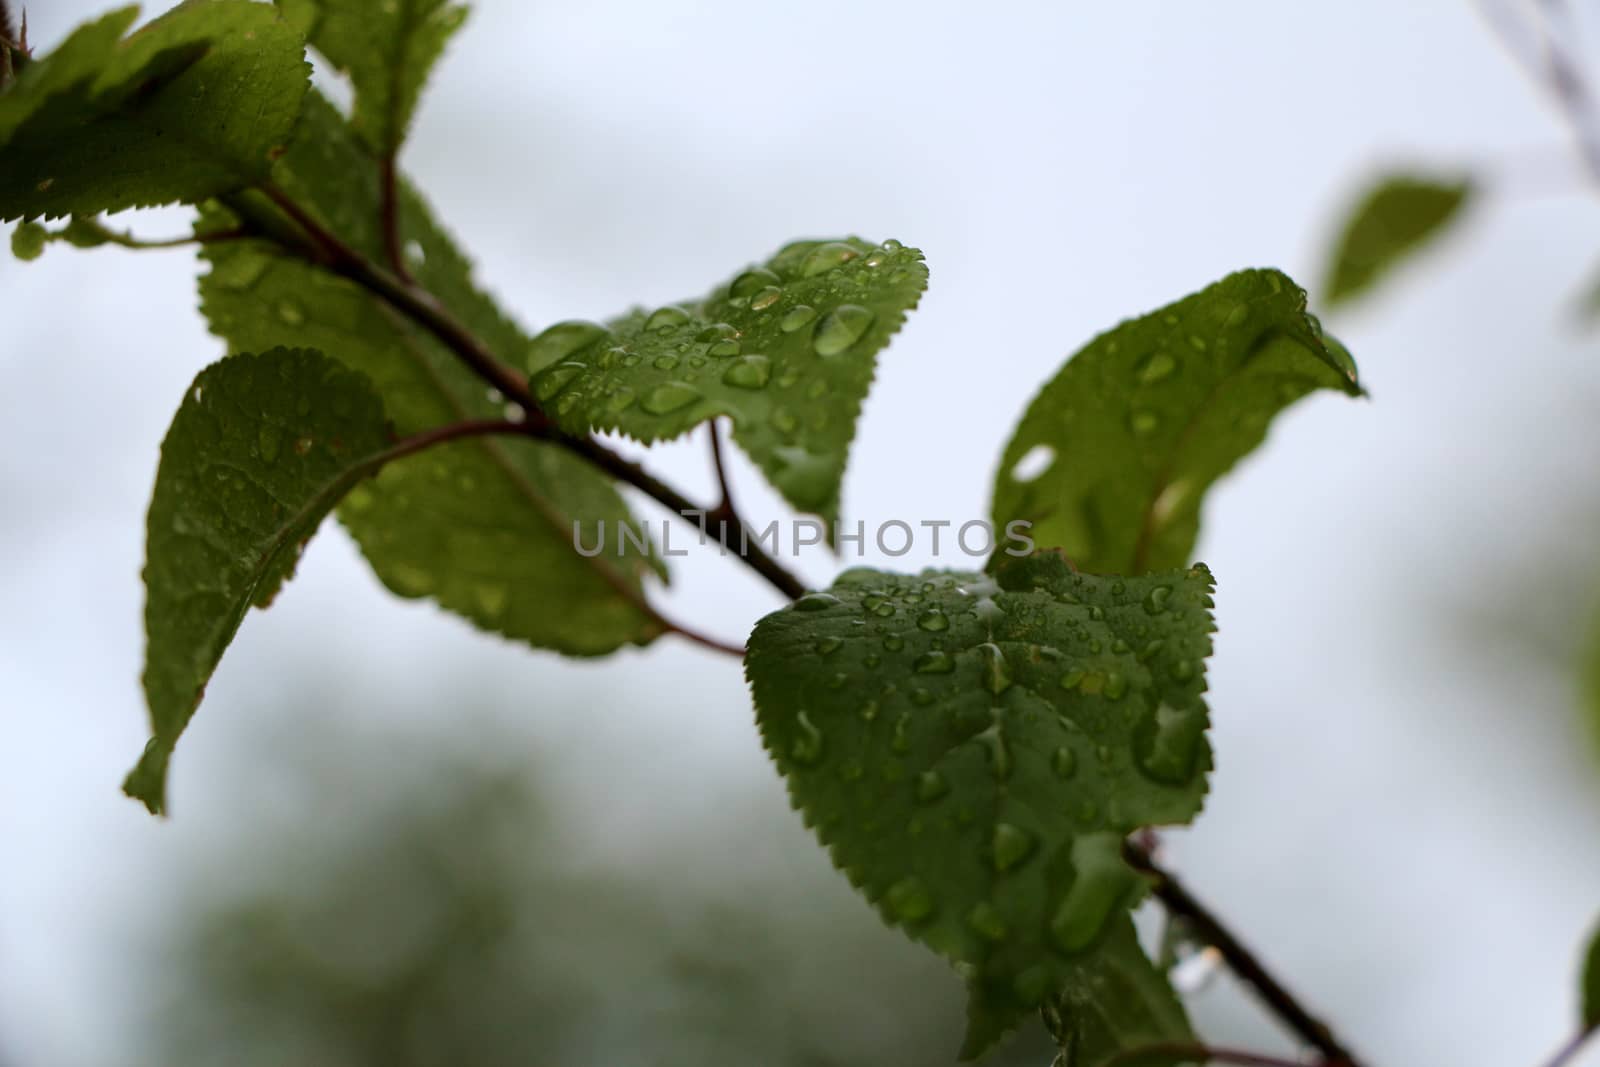 Macro tree branch with raindrops, dew on leaves close-up photography. Overcast green garden after the rain.